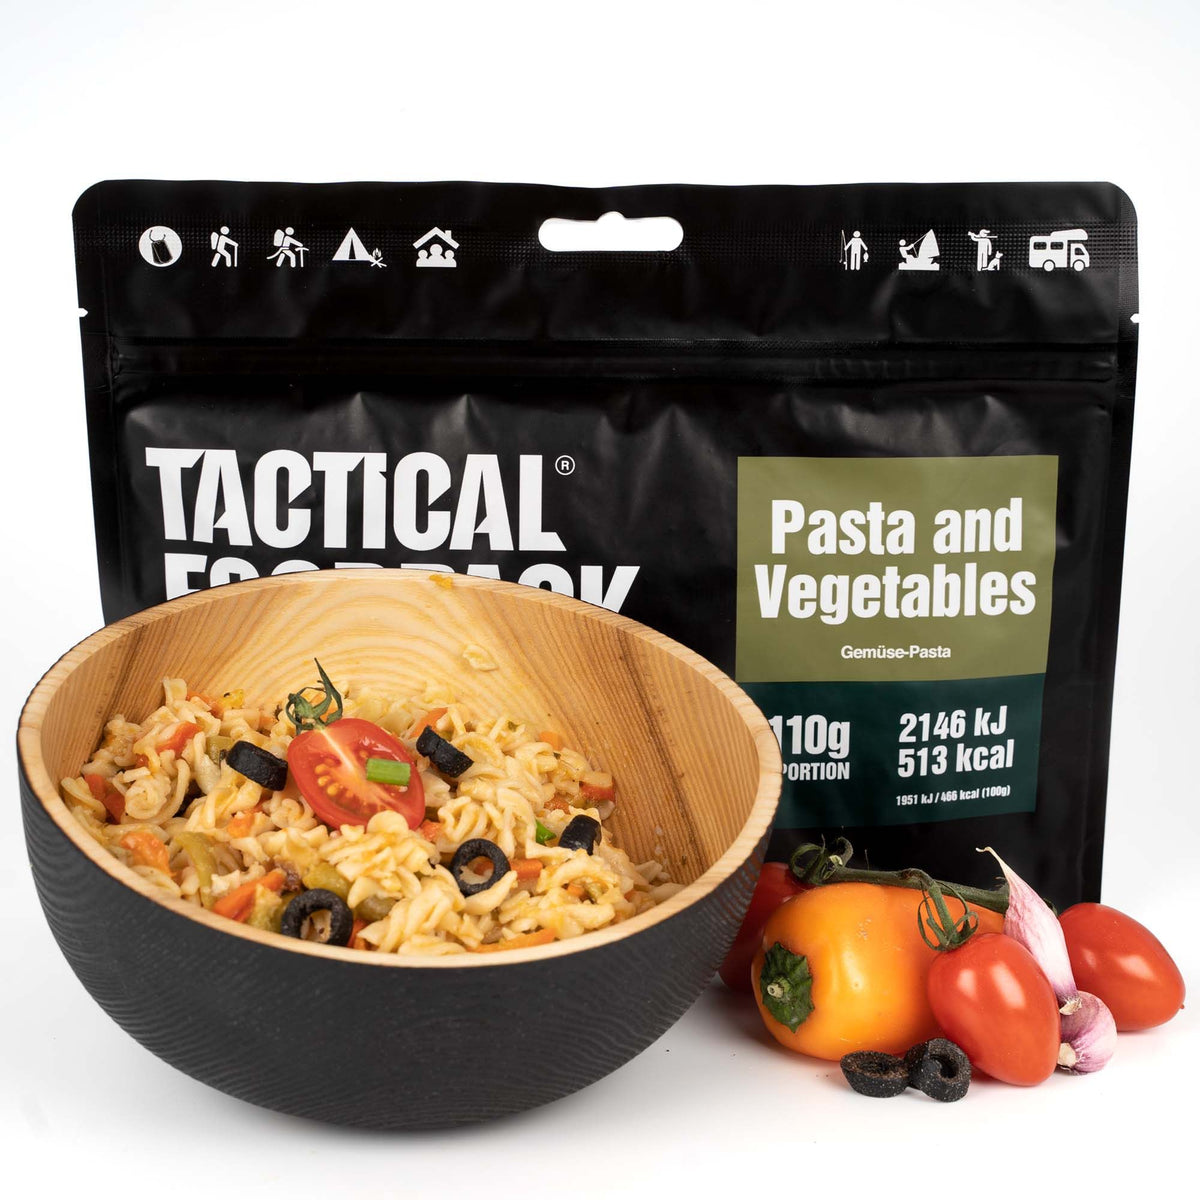 Tactical Foodpack | Pasta and Vegetables 110g - Pasta e verdure